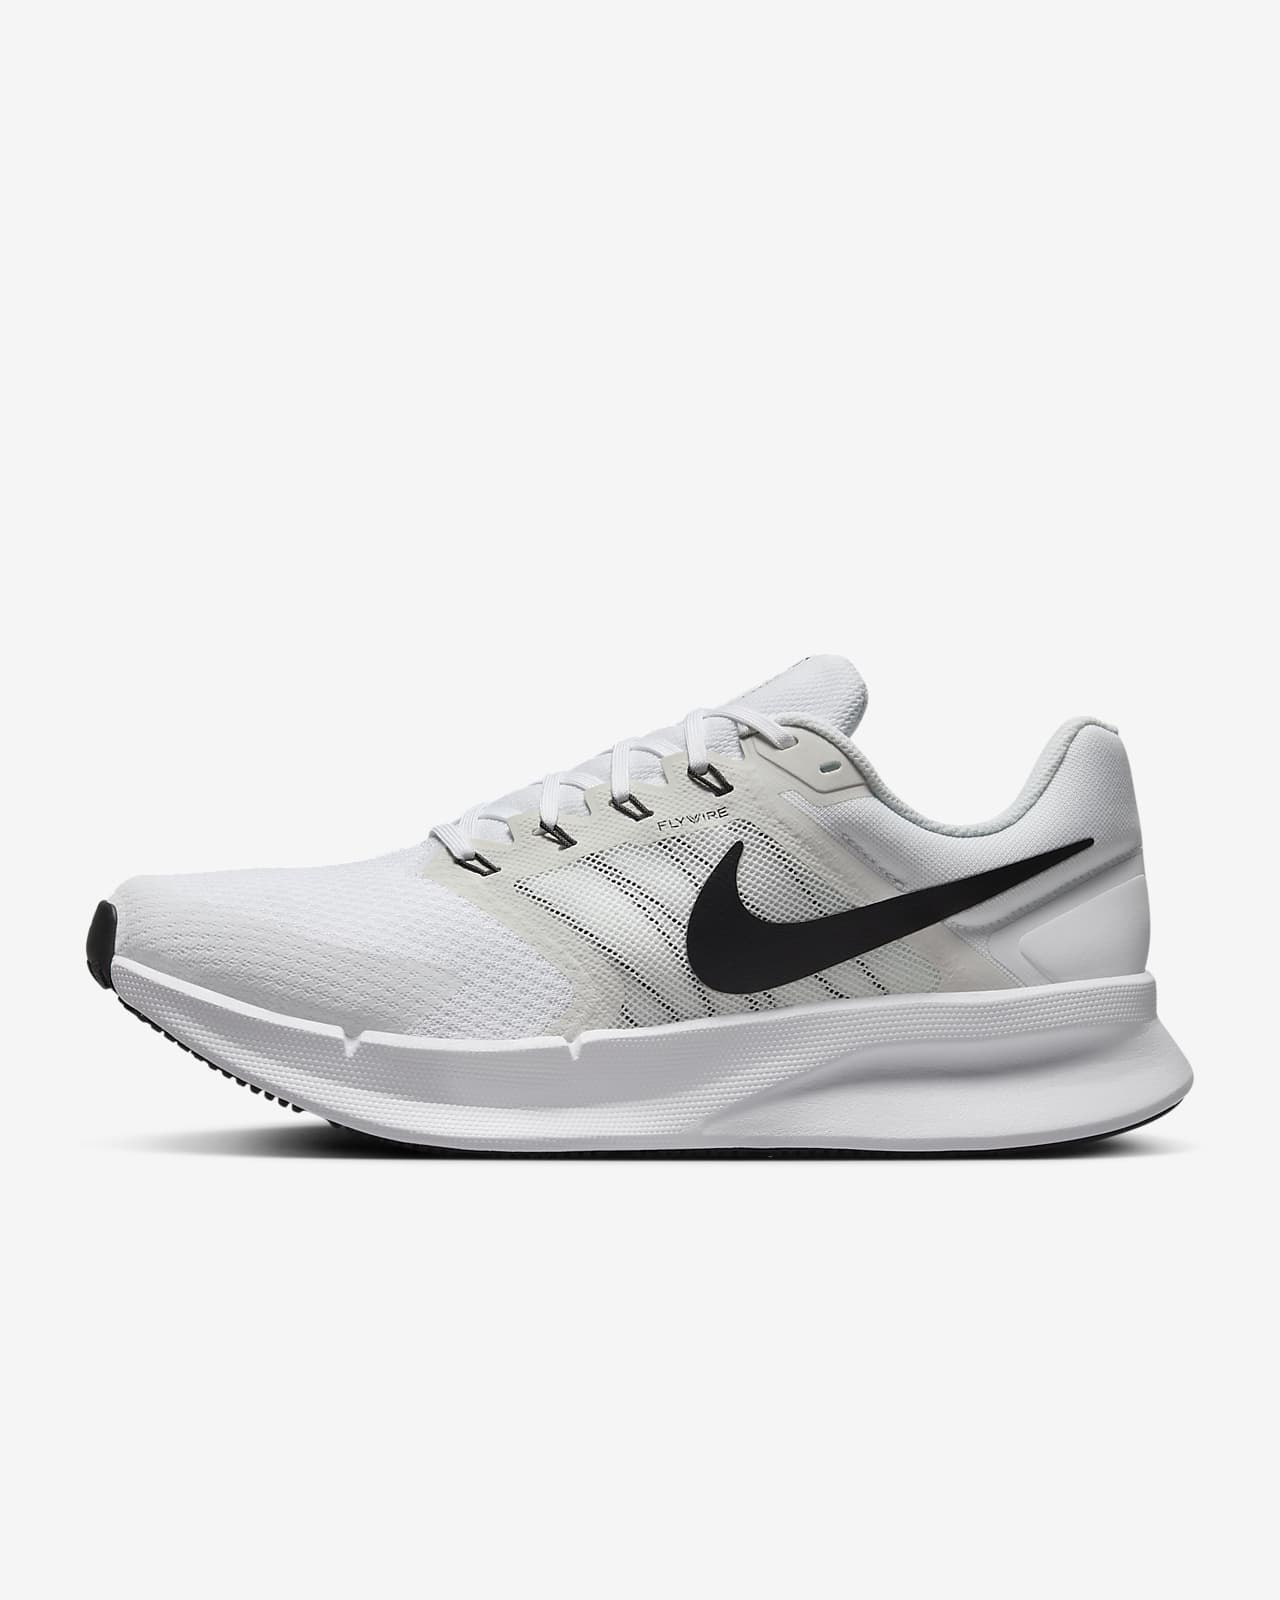 NIKE Flex Experience Rn 8 Running Shoe For Men - Buy NIKE Flex Experience Rn  8 Running Shoe For Men Online at Best Price - Shop Online for Footwears in  India